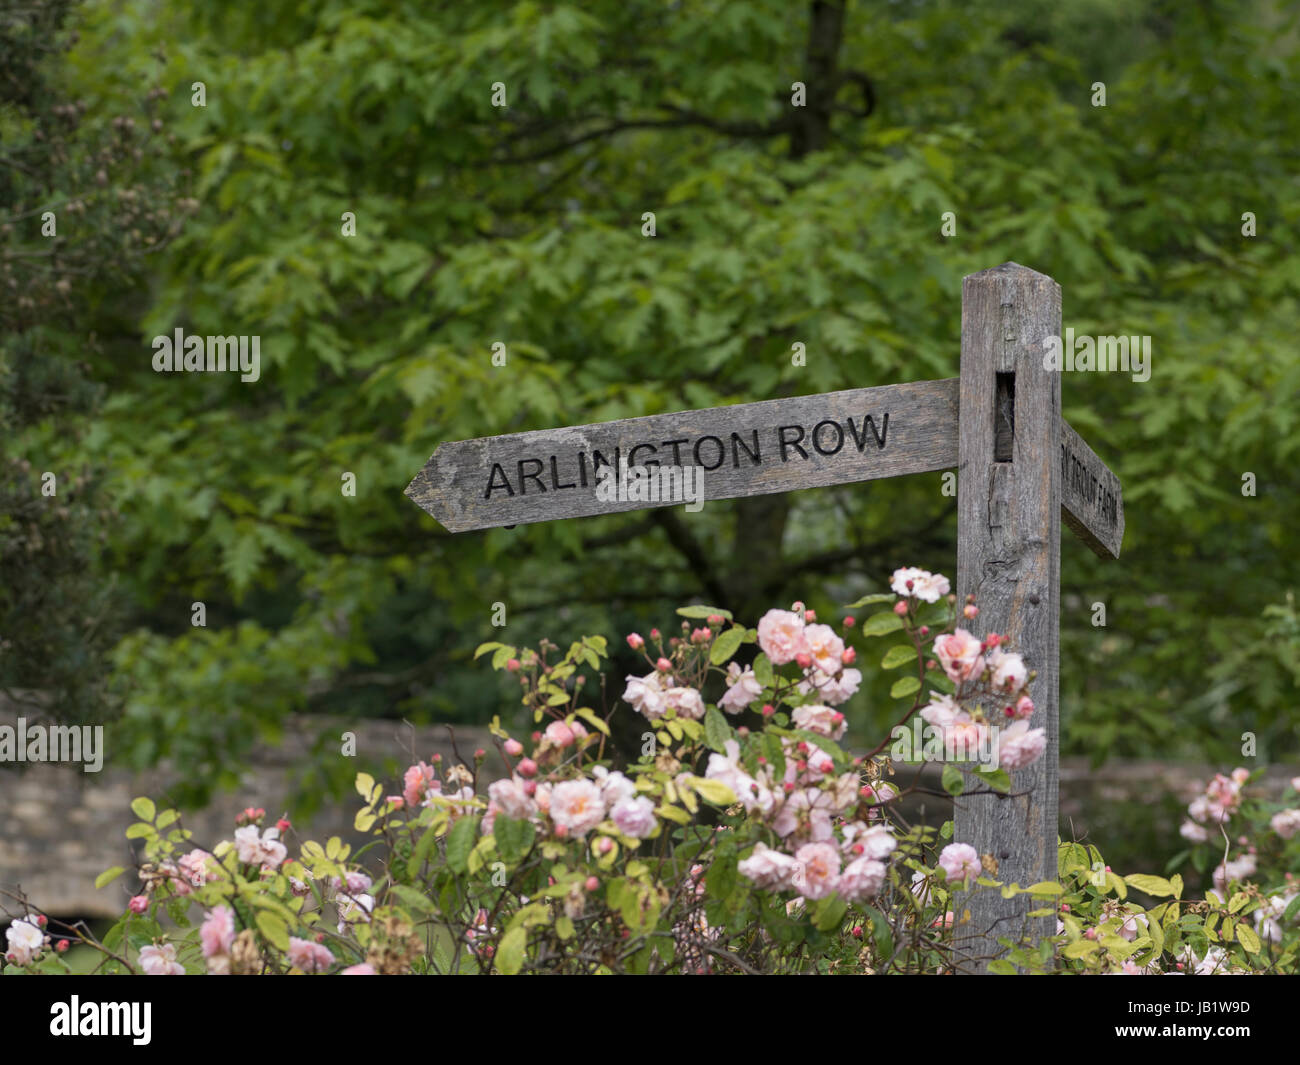 Close up view of Arlington Row sign in Cotswolds village of Bibury, Gloucestershire, United Kingdom Stock Photo